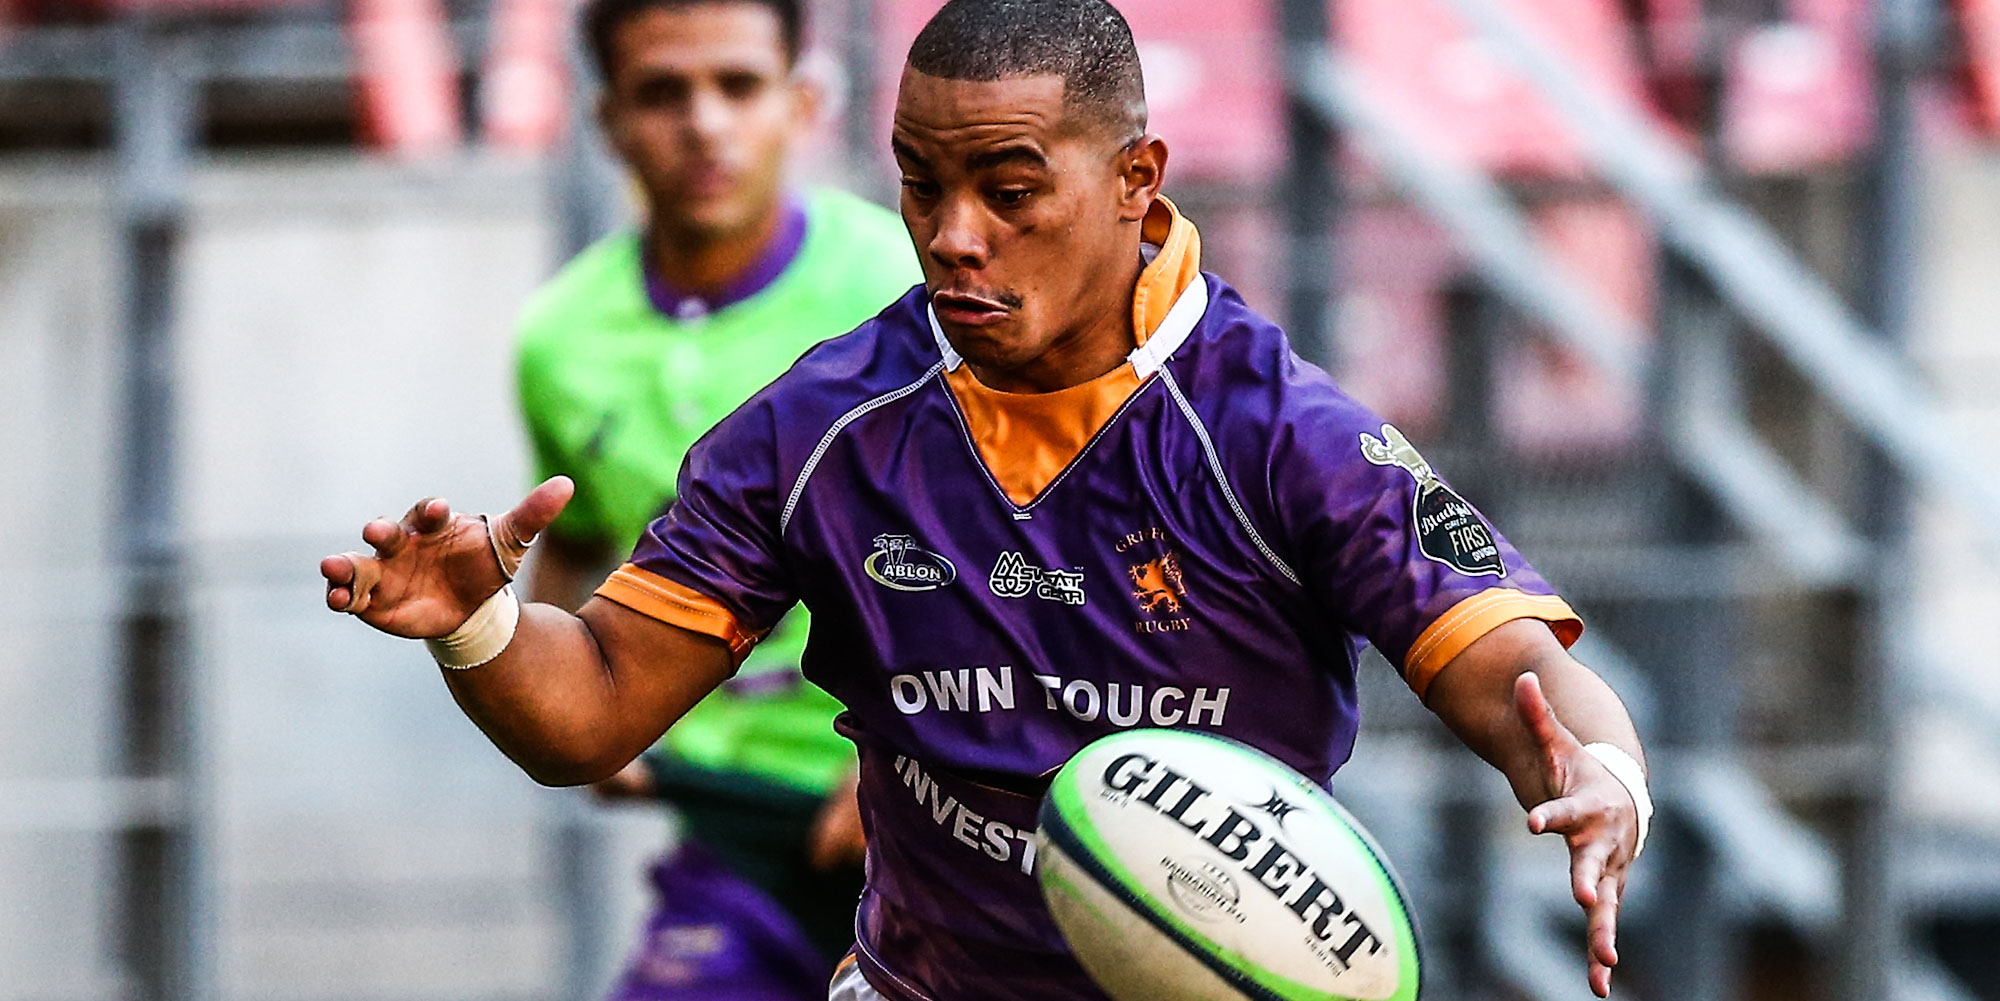 Carling Currie Cup First Division Player of the Year: Jaywinn Juries (Down Touch Griffons)